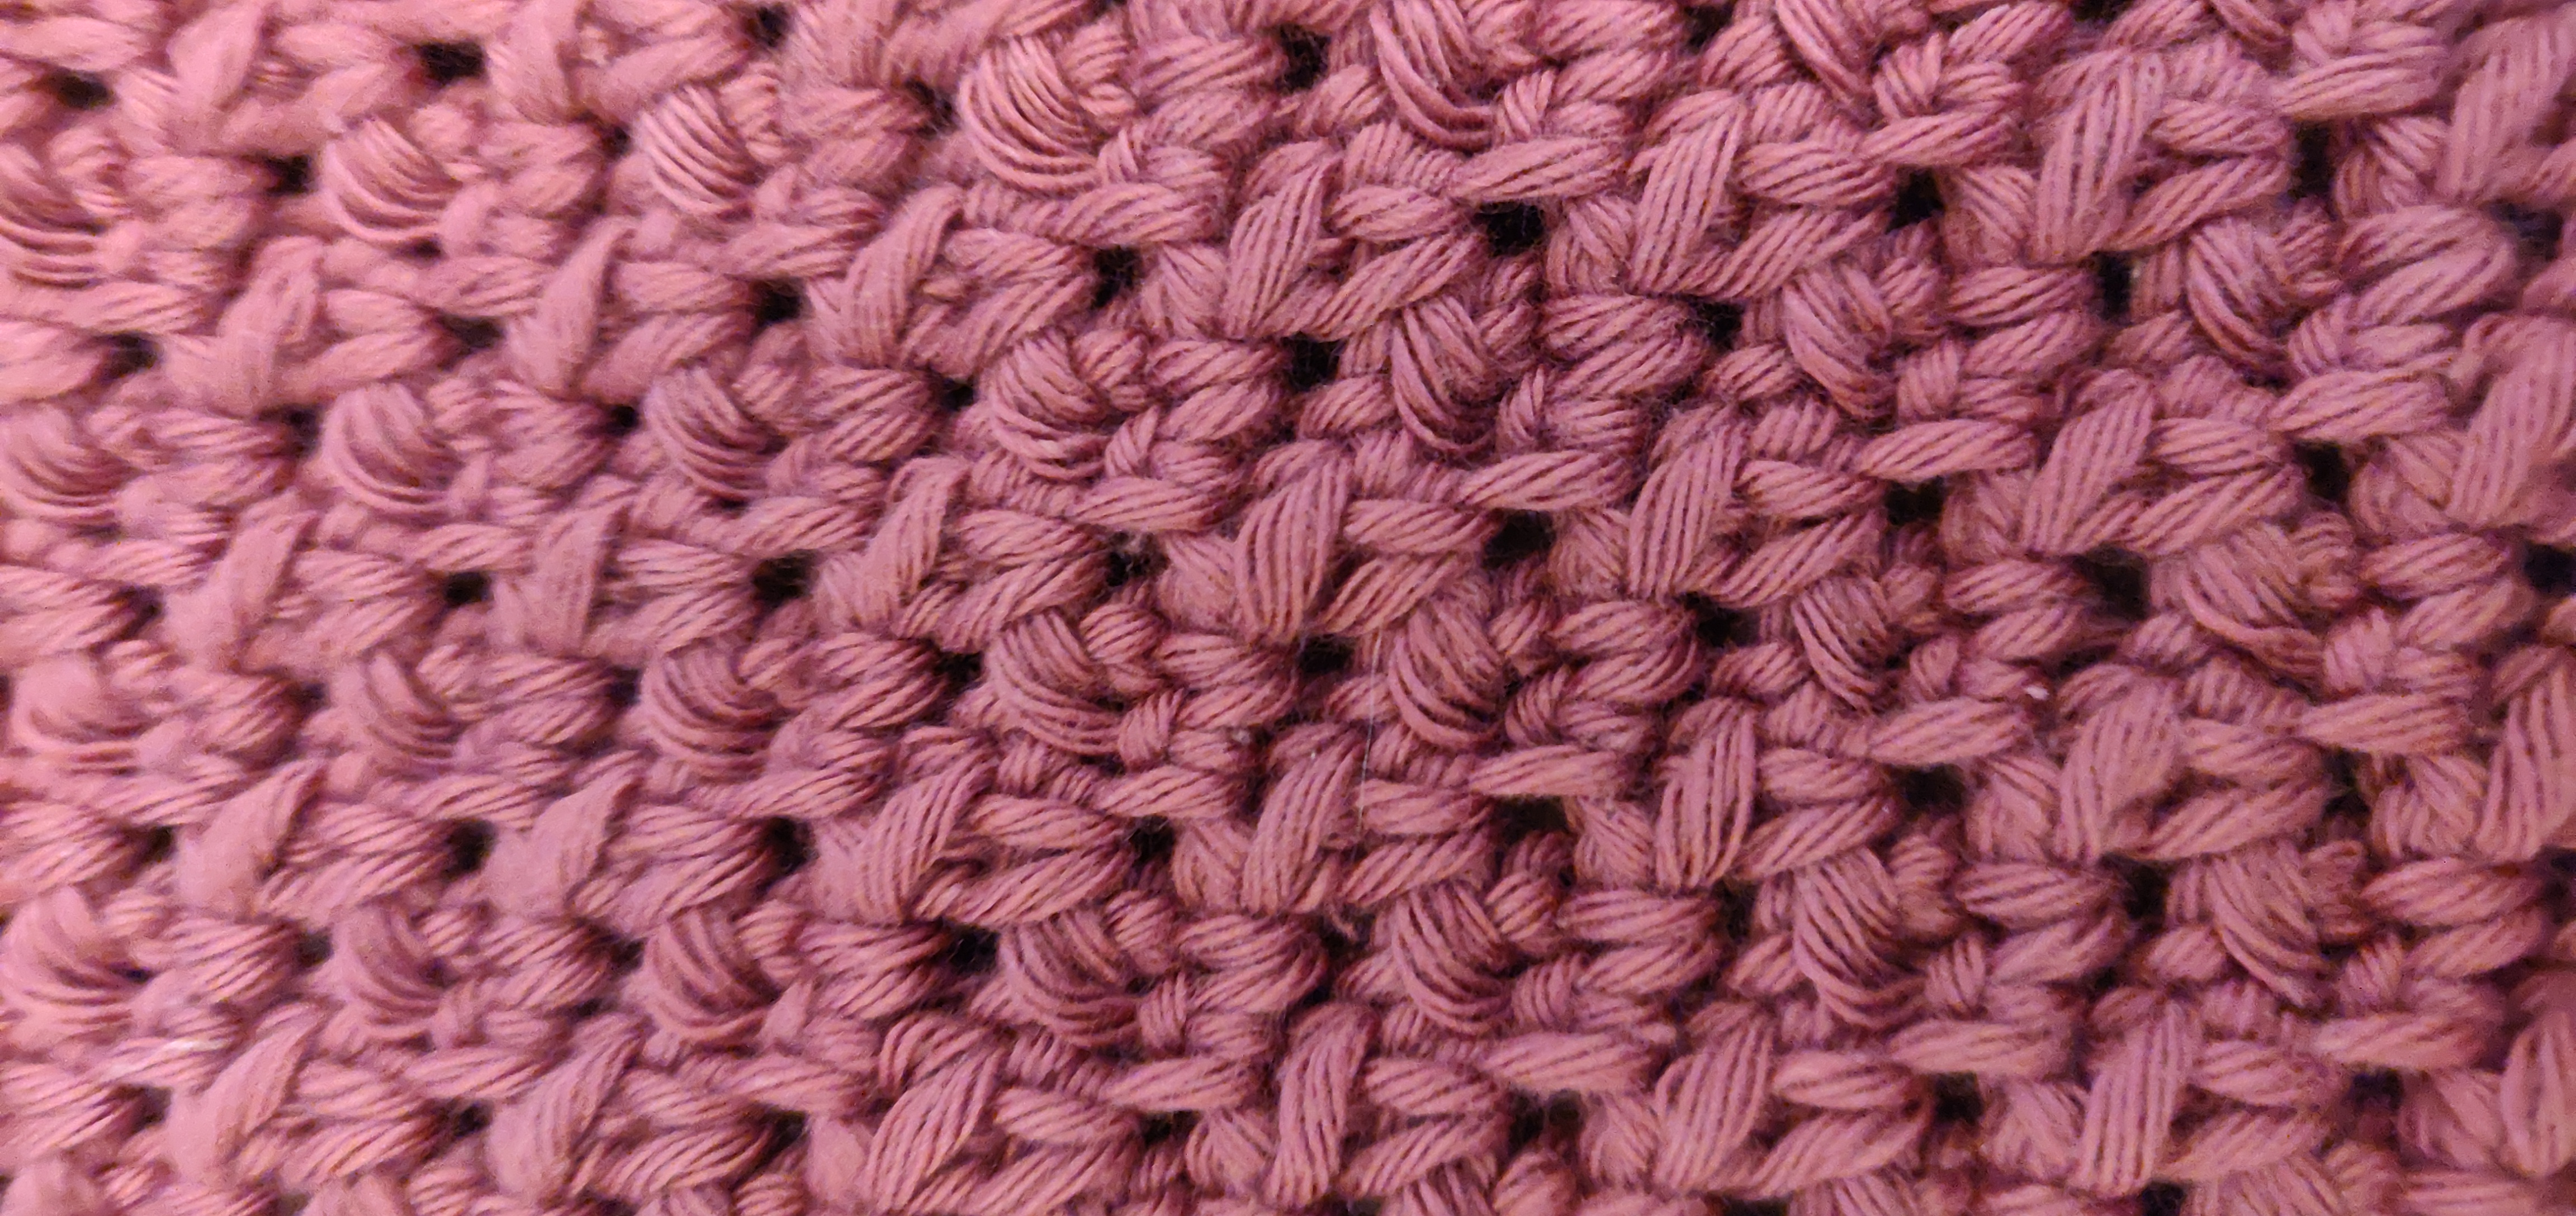 The waffle stitch we used for this project